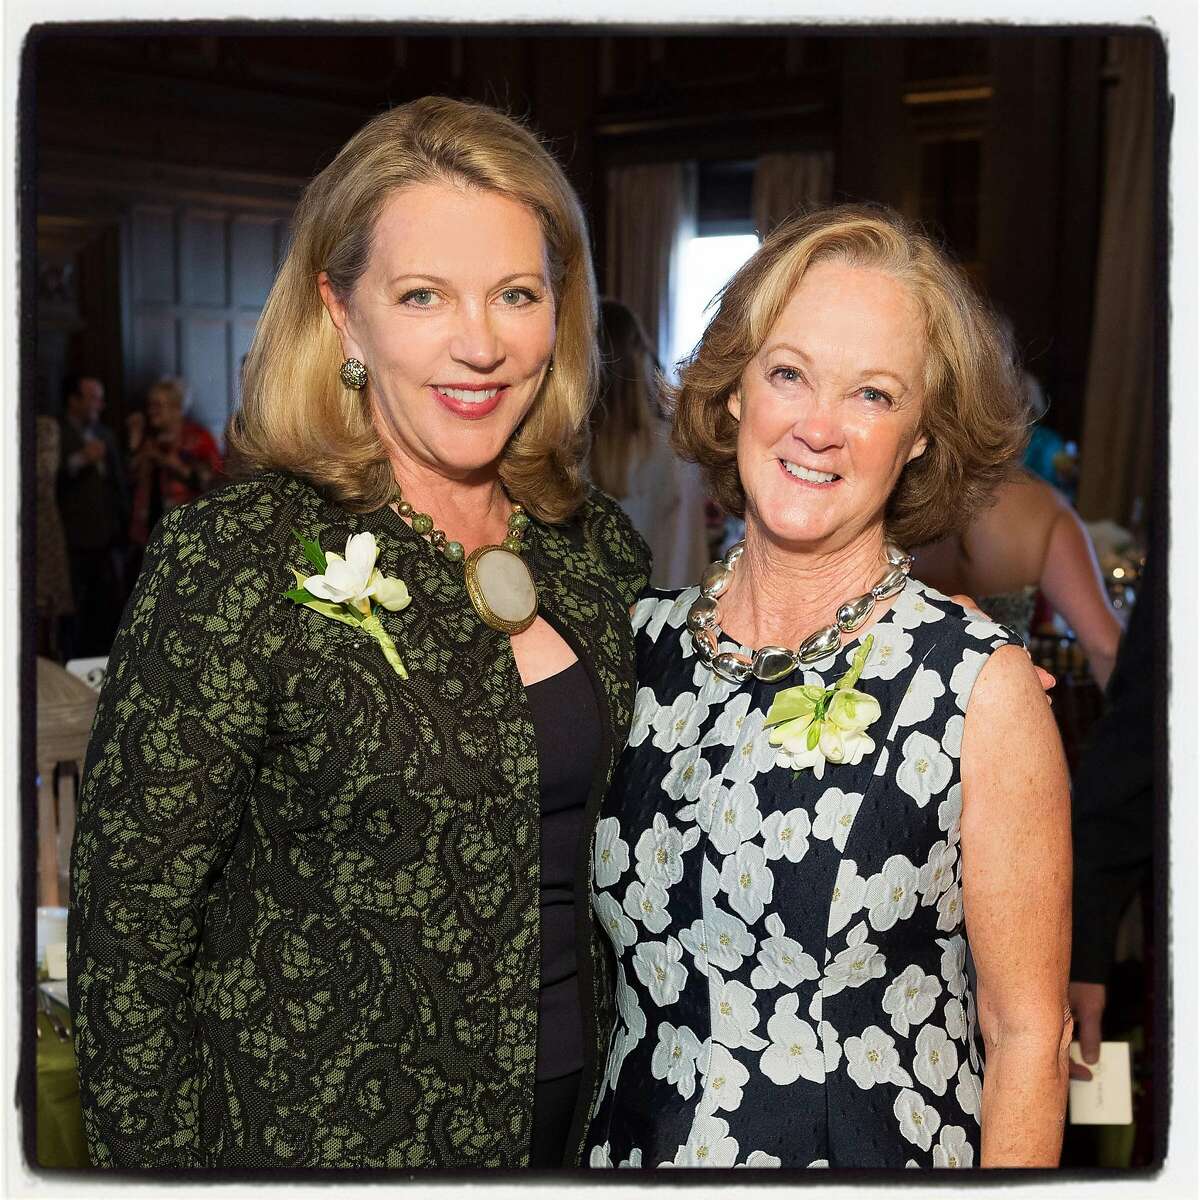 Designer Suzanne Tucker (left) and landscape designer Elizabeth Everdell were honored for their work with the ICAA Julia Morgan Award. June 2016. By Drew Altizer